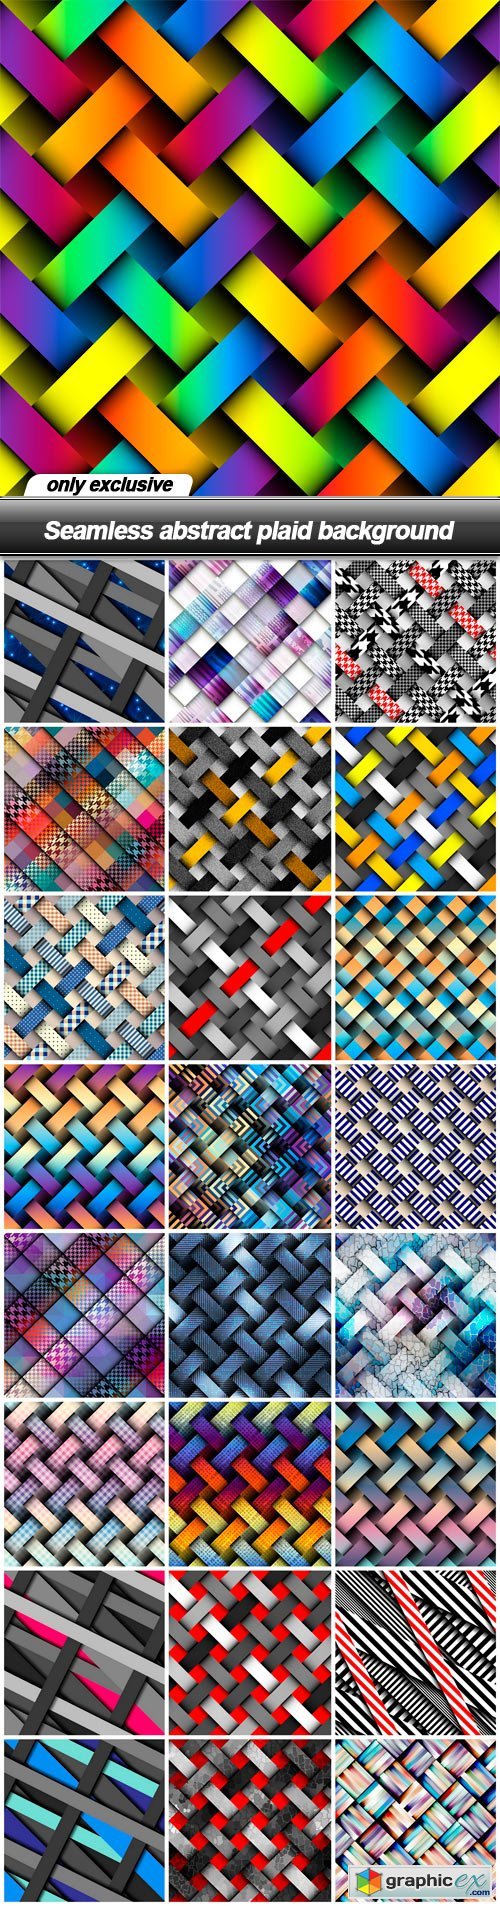 Seamless abstract plaid background - 25 EPS